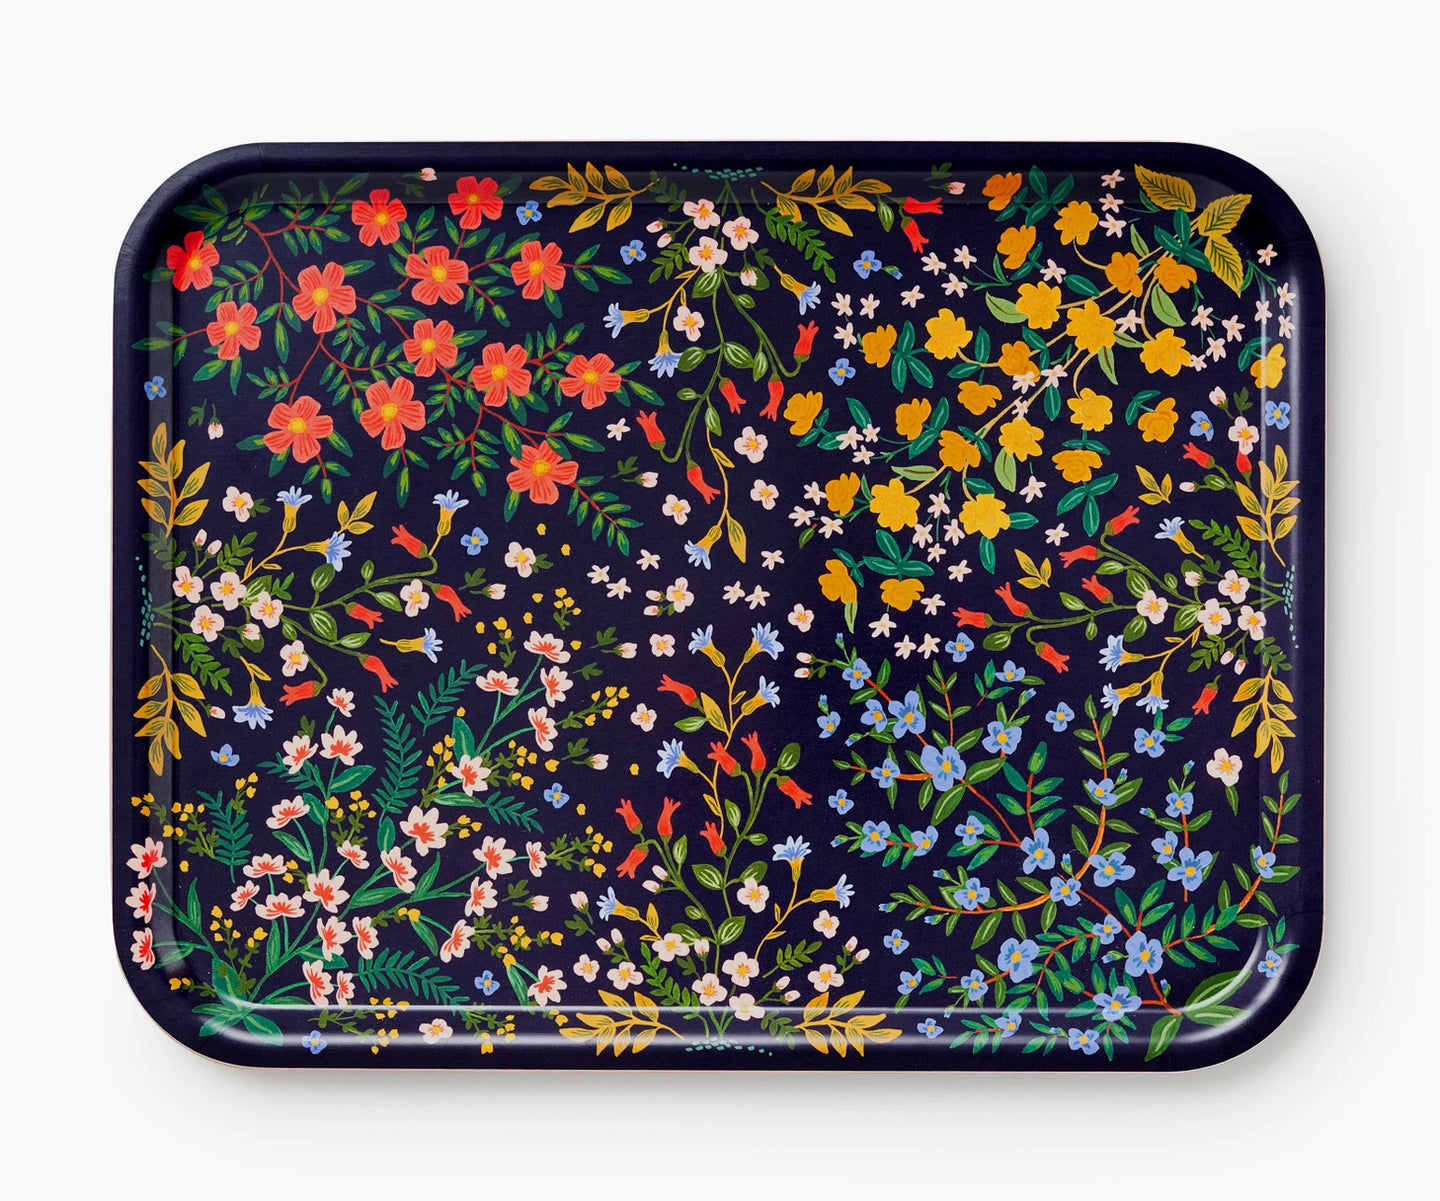 Rifle Paper Co. Large Rectangle Serving Tray - Wildwood